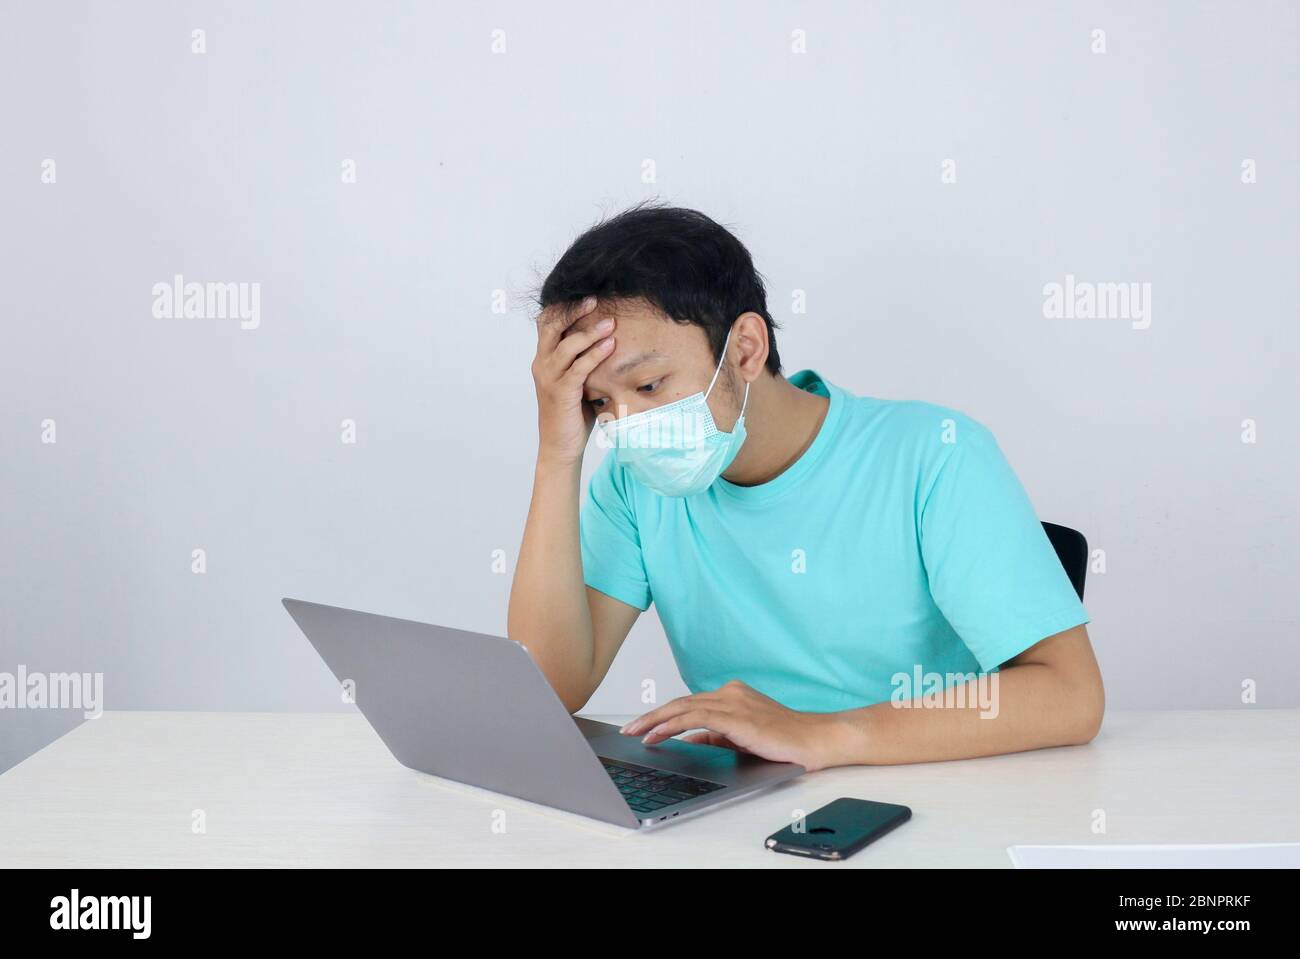 Young Asian man wearing medical mask is feeling unhealthy, tired, and confused with working in laptops on the table. Stock Photo